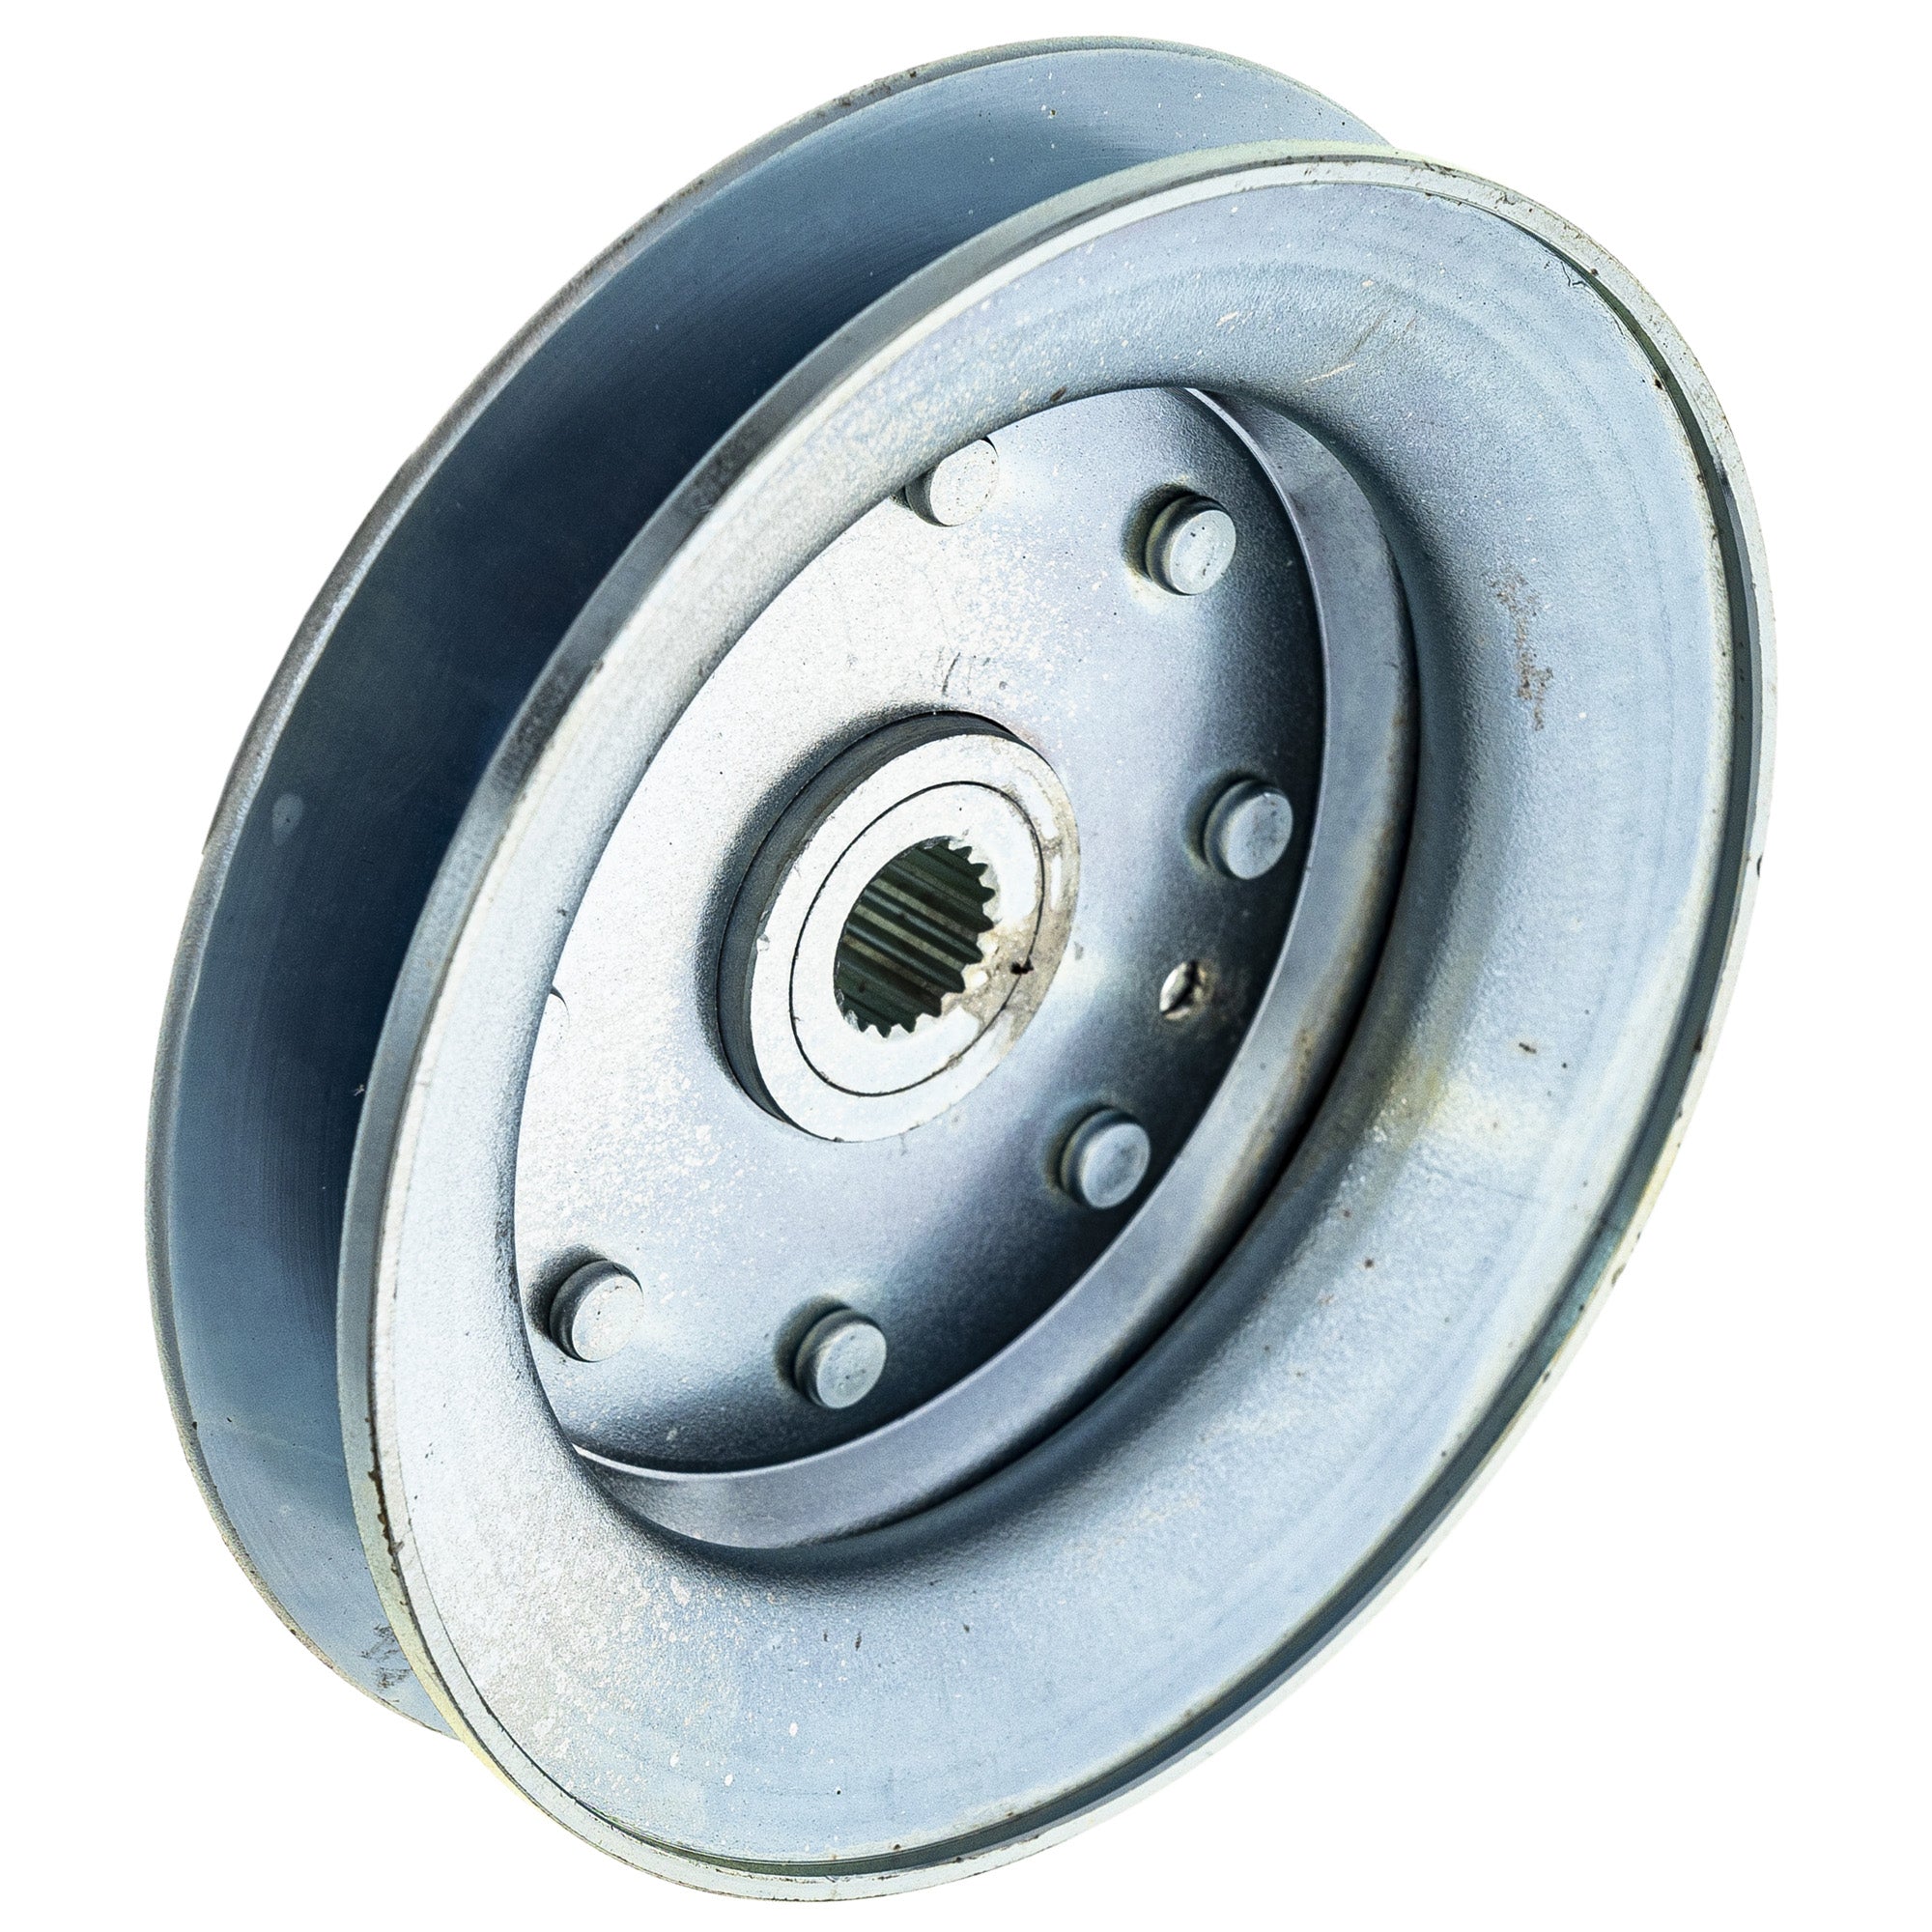 Idler Pulley for AYP Husqvarna CT130 CTH130 CTH150 532165630 2 Pack